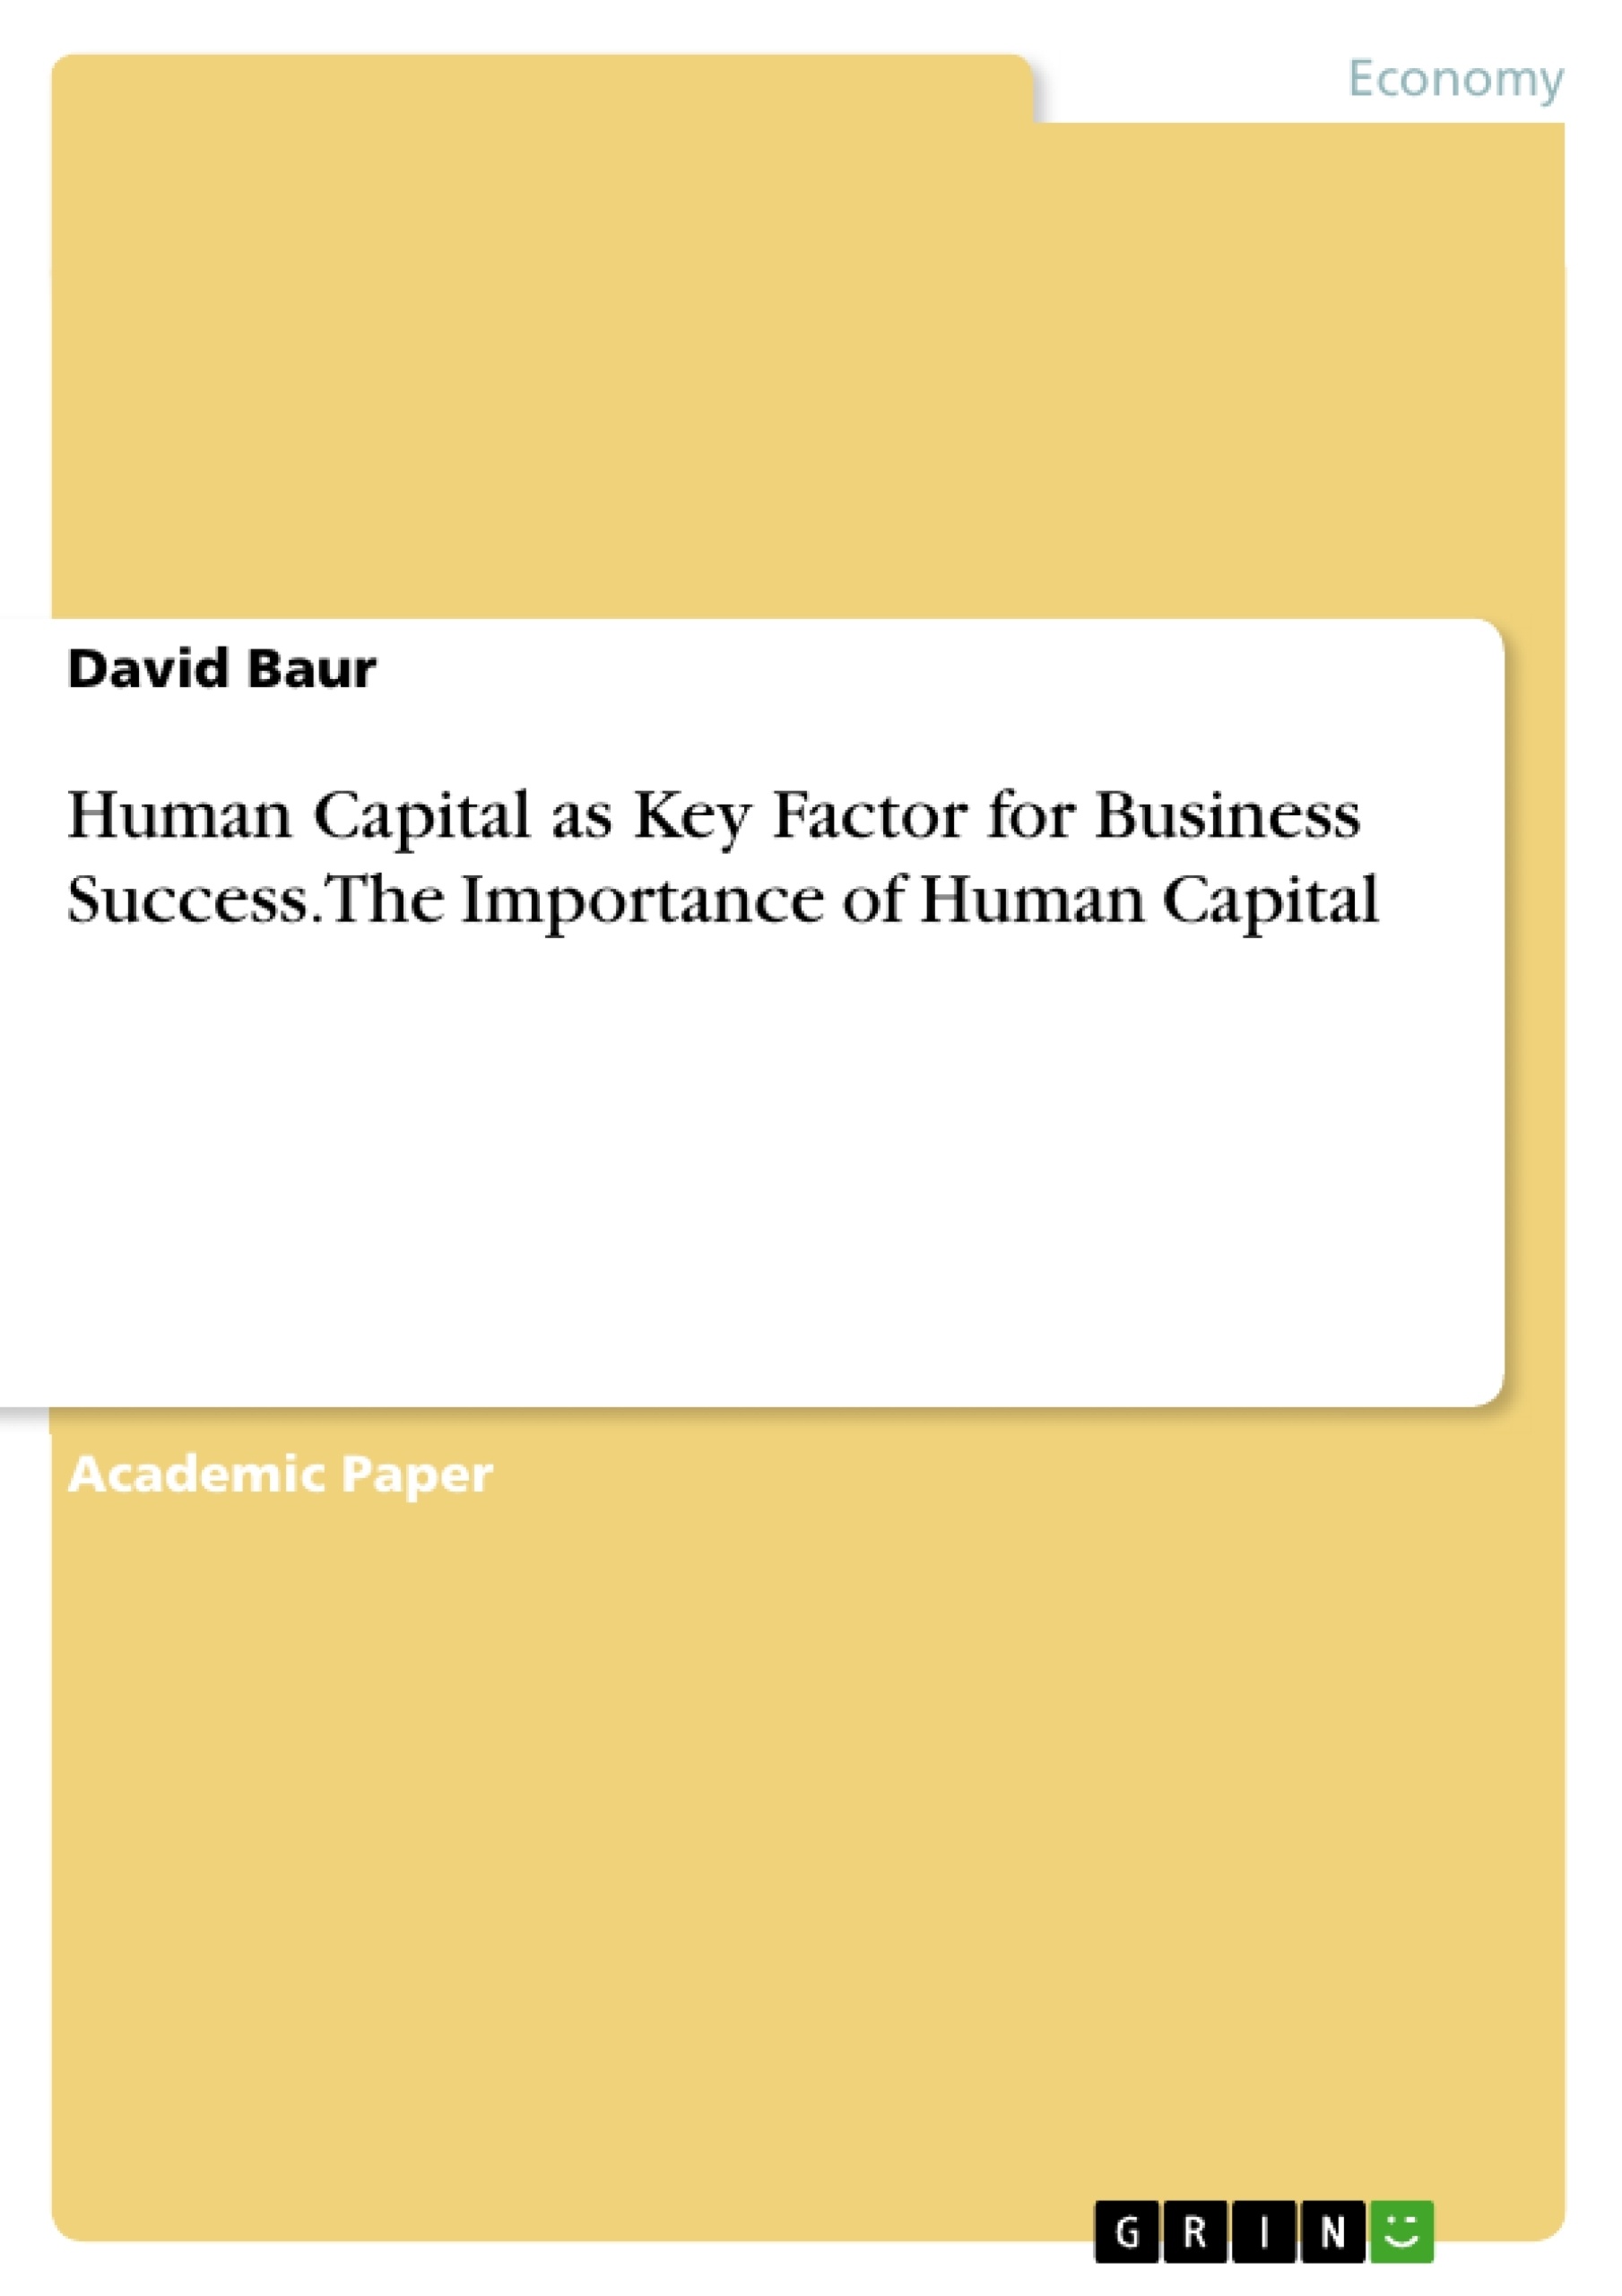 Title: Human Capital as Key Factor for Business Success. The Importance of Human Capital